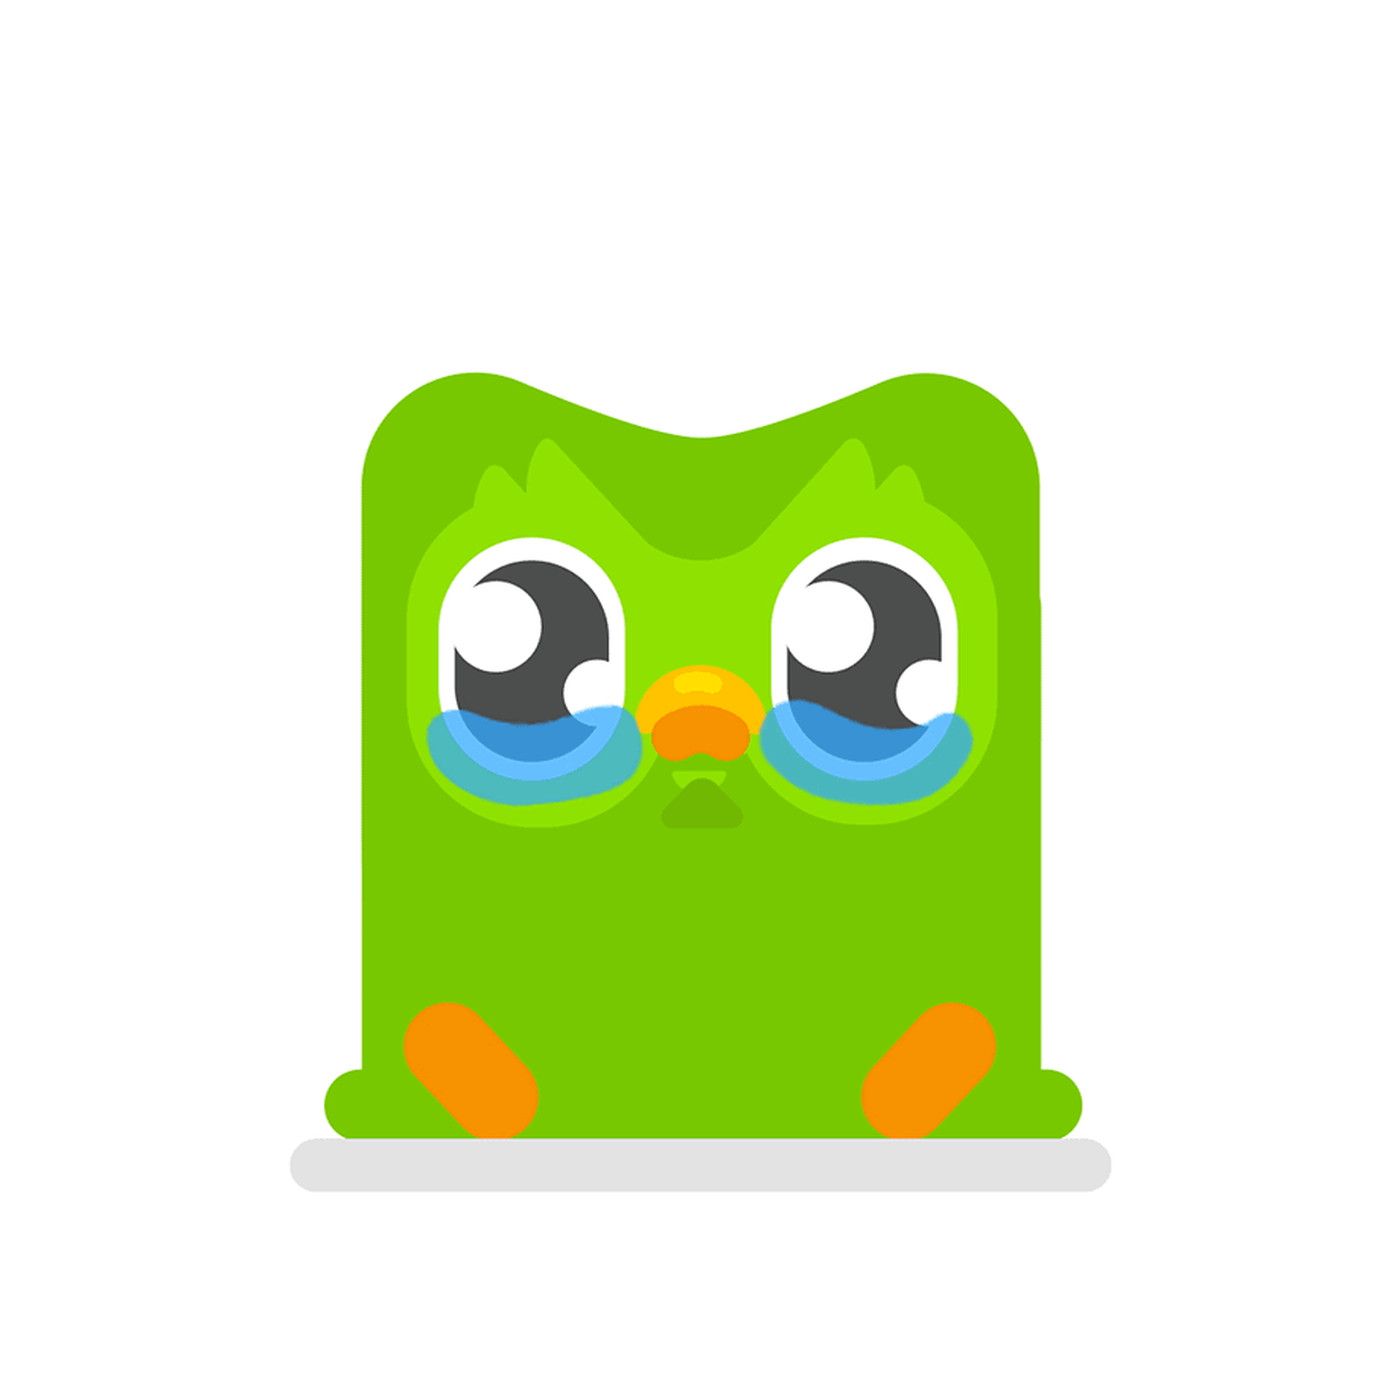 Duolingo Redesigned Its Owl To Guilt Trip You Even Harder